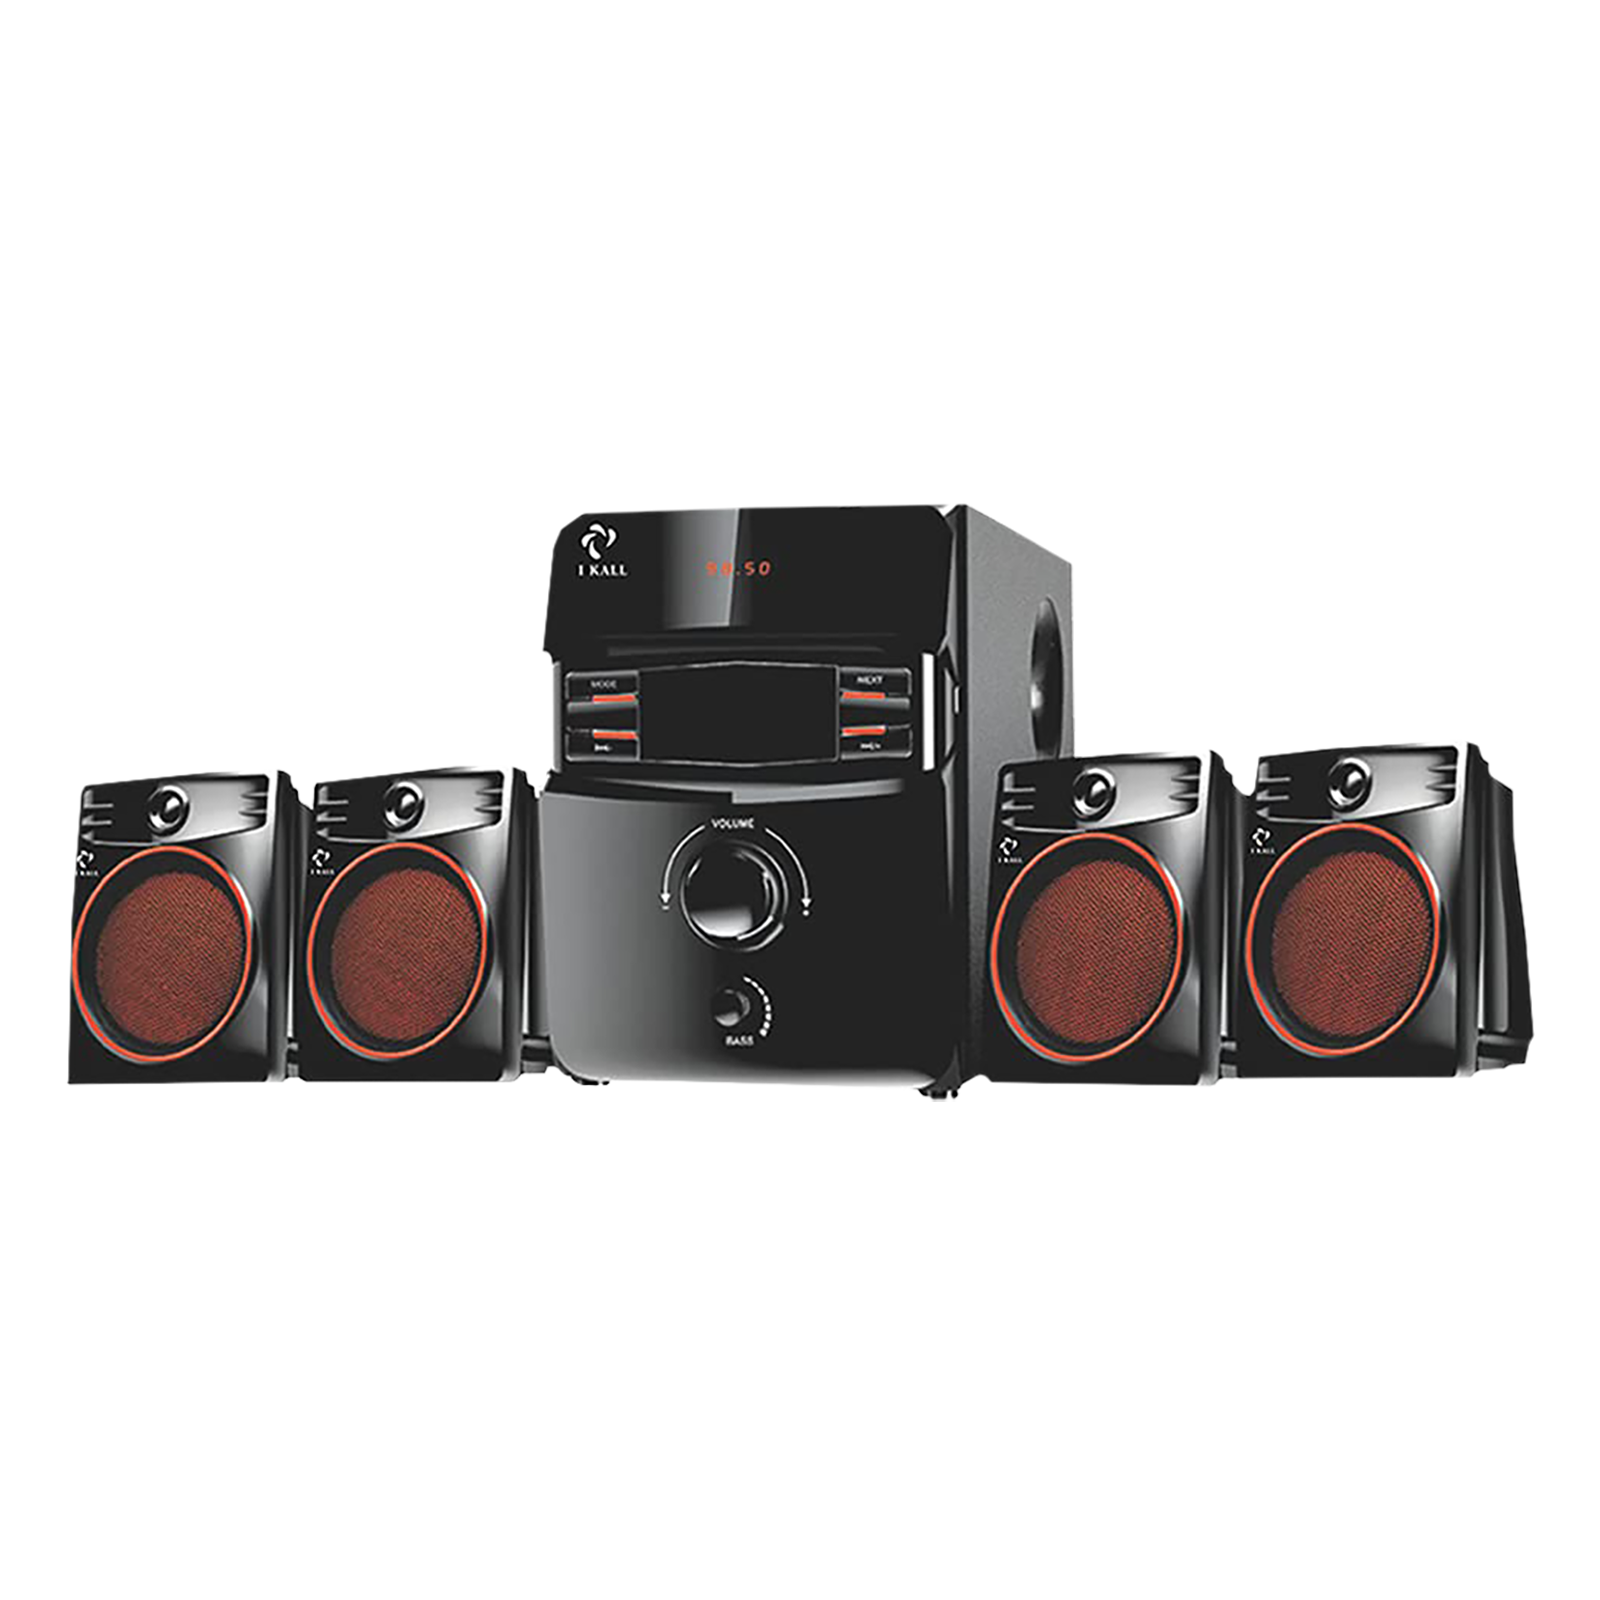 I KALL IK-407 60W Bluetooth Home Theatre with Remote (Deep Bass, 4.1 Channel, Black)